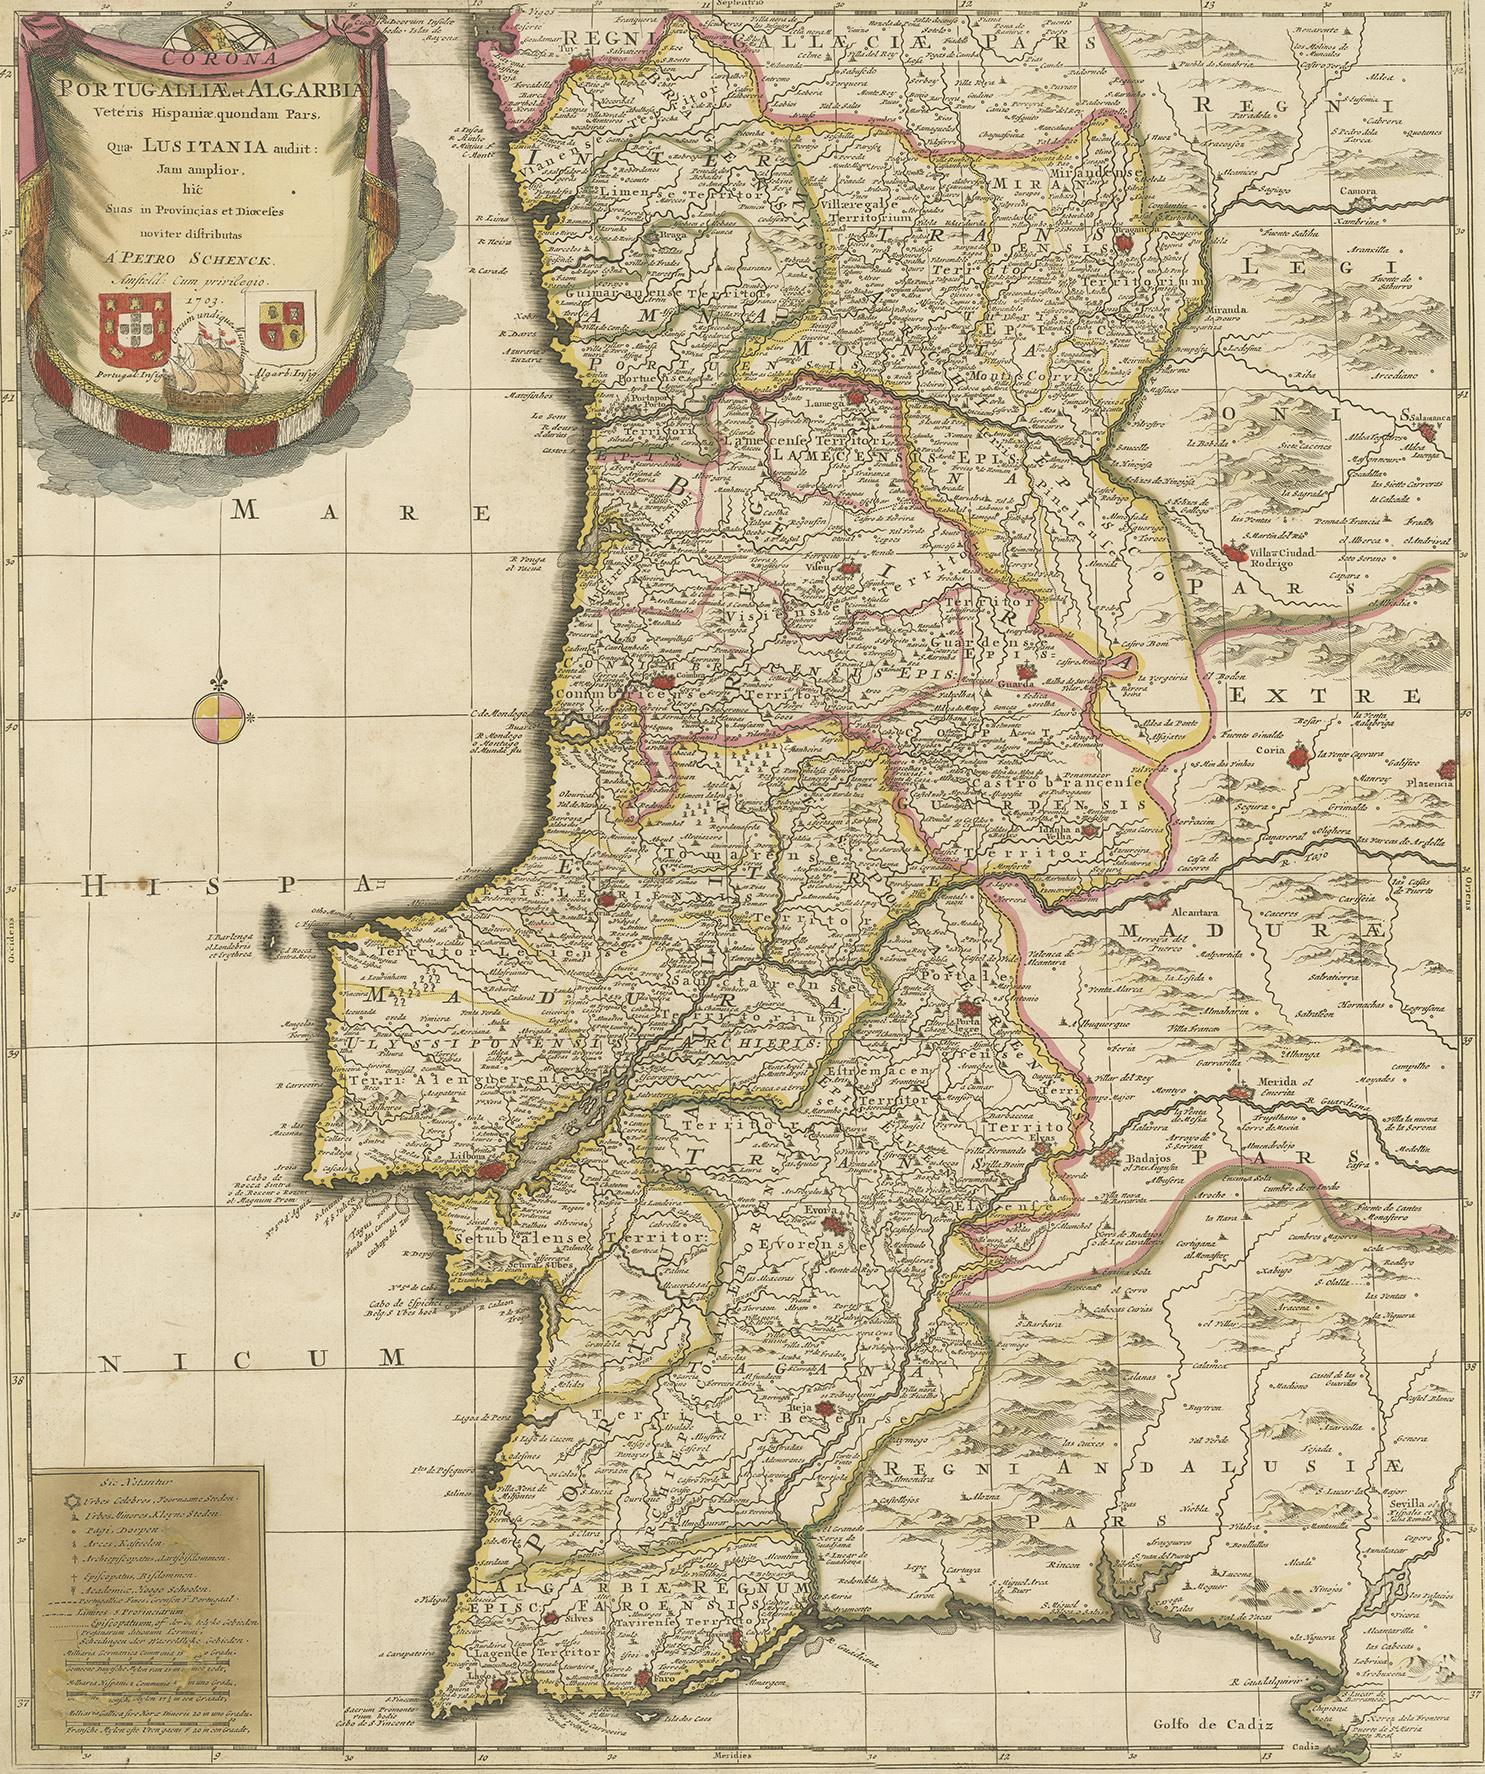 Antique map titled 'Portugalliae et Algarbia'. Striking example of Schenk's rare map of Portugal, with the coats of arms of Portugal, Algarbia and a Spanish sailing vessell in the cartouche. 

Peter Schenk the Elder (1660-1711) moved to Amsterdam in